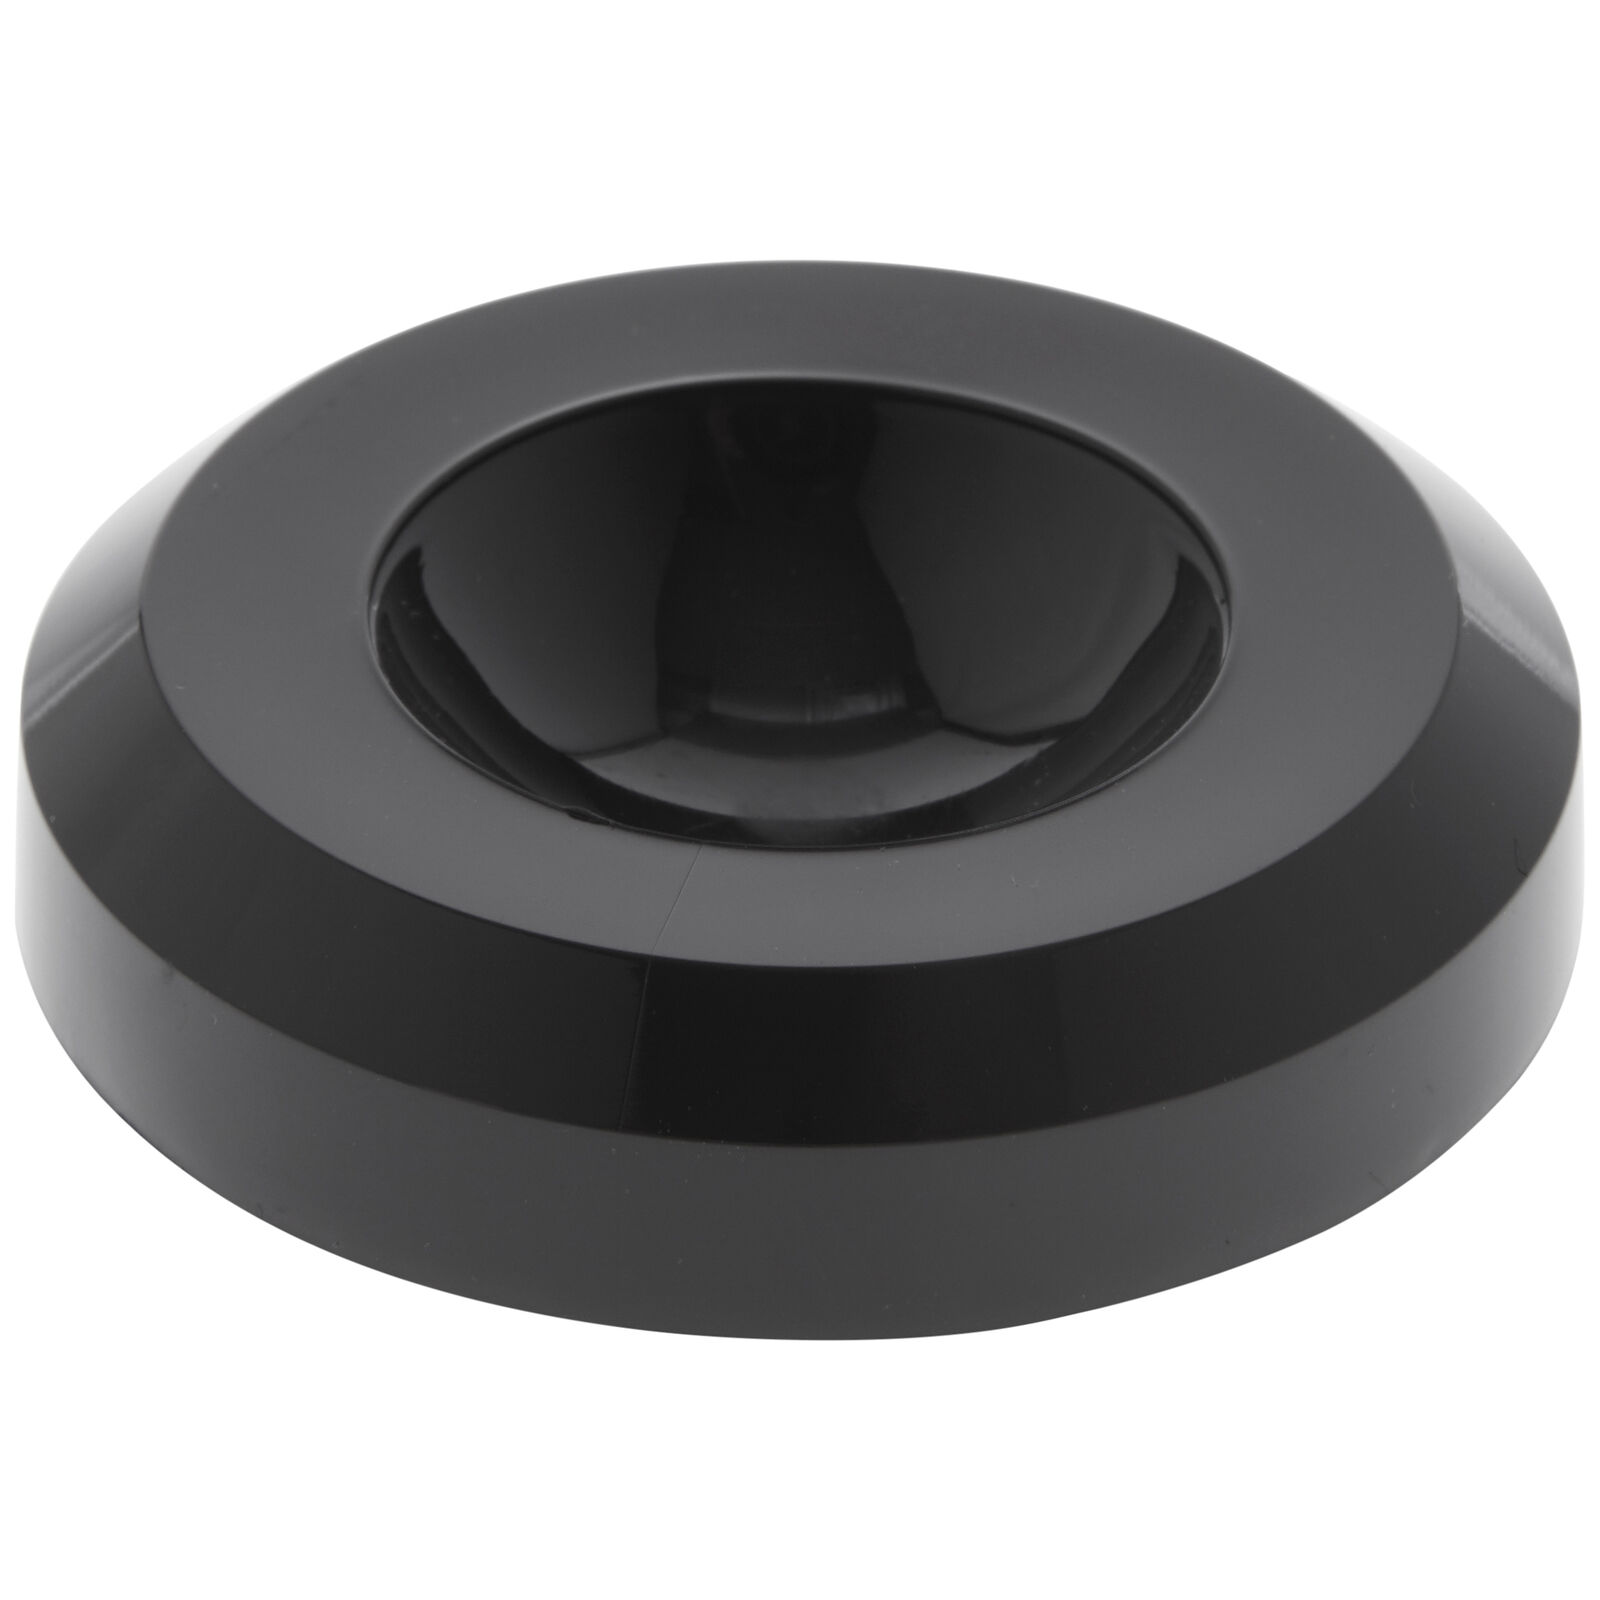 Plymor Black Acrylic Round Base With Circle Holds Sphere, 0.5"h X 2"w (12 Pack)